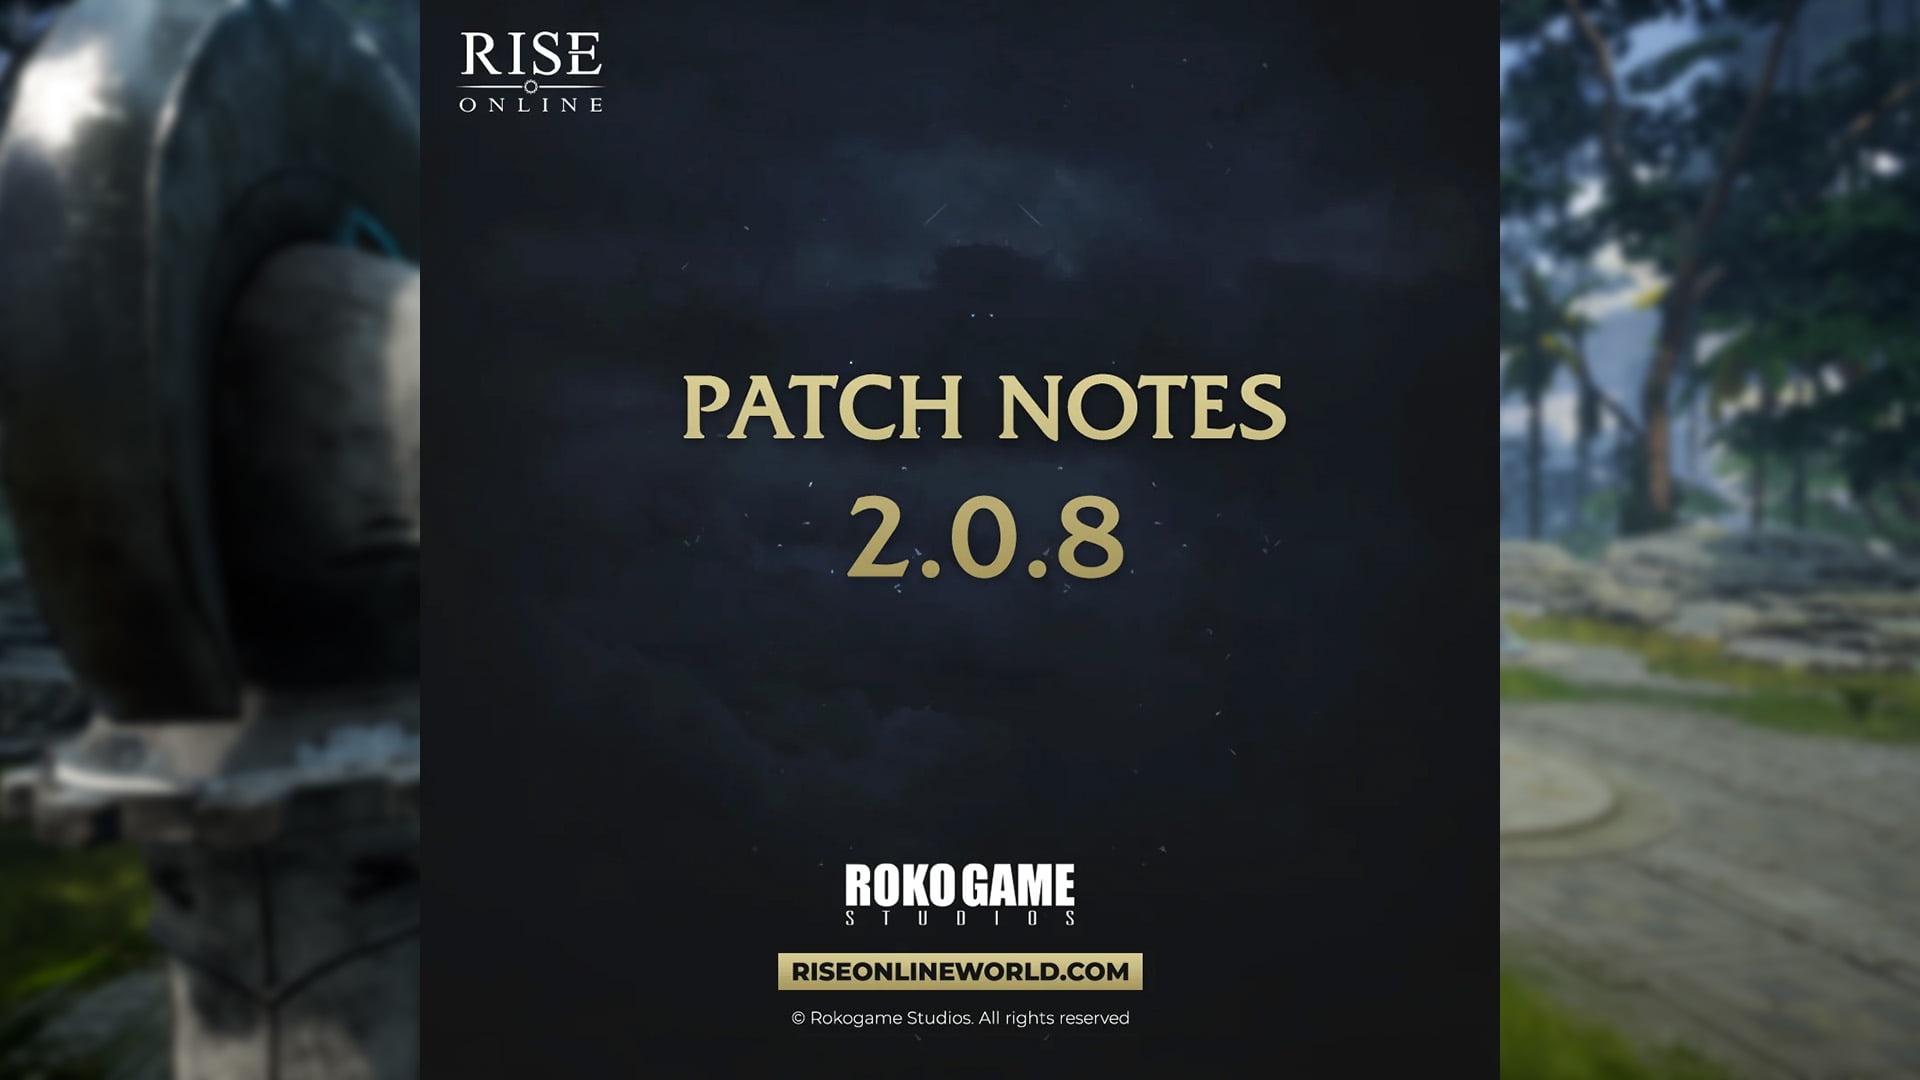 Rise Online – 2.0.8 Patch Notes